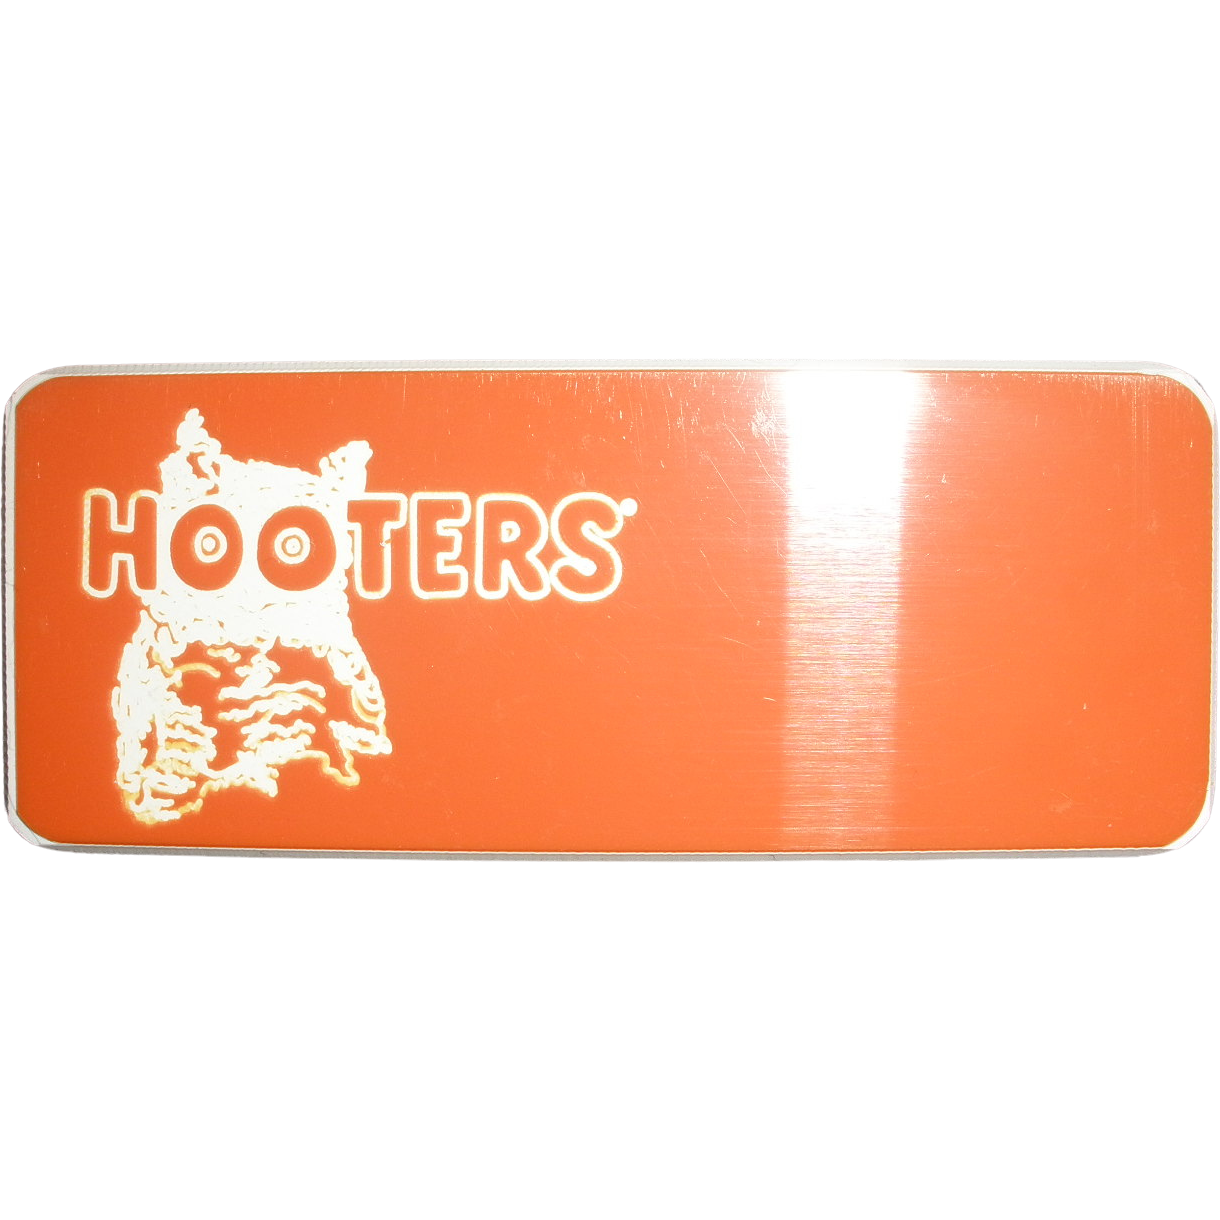 Hooters Girl Women's Uniform Outfit Costume Black Pouch and Nametag